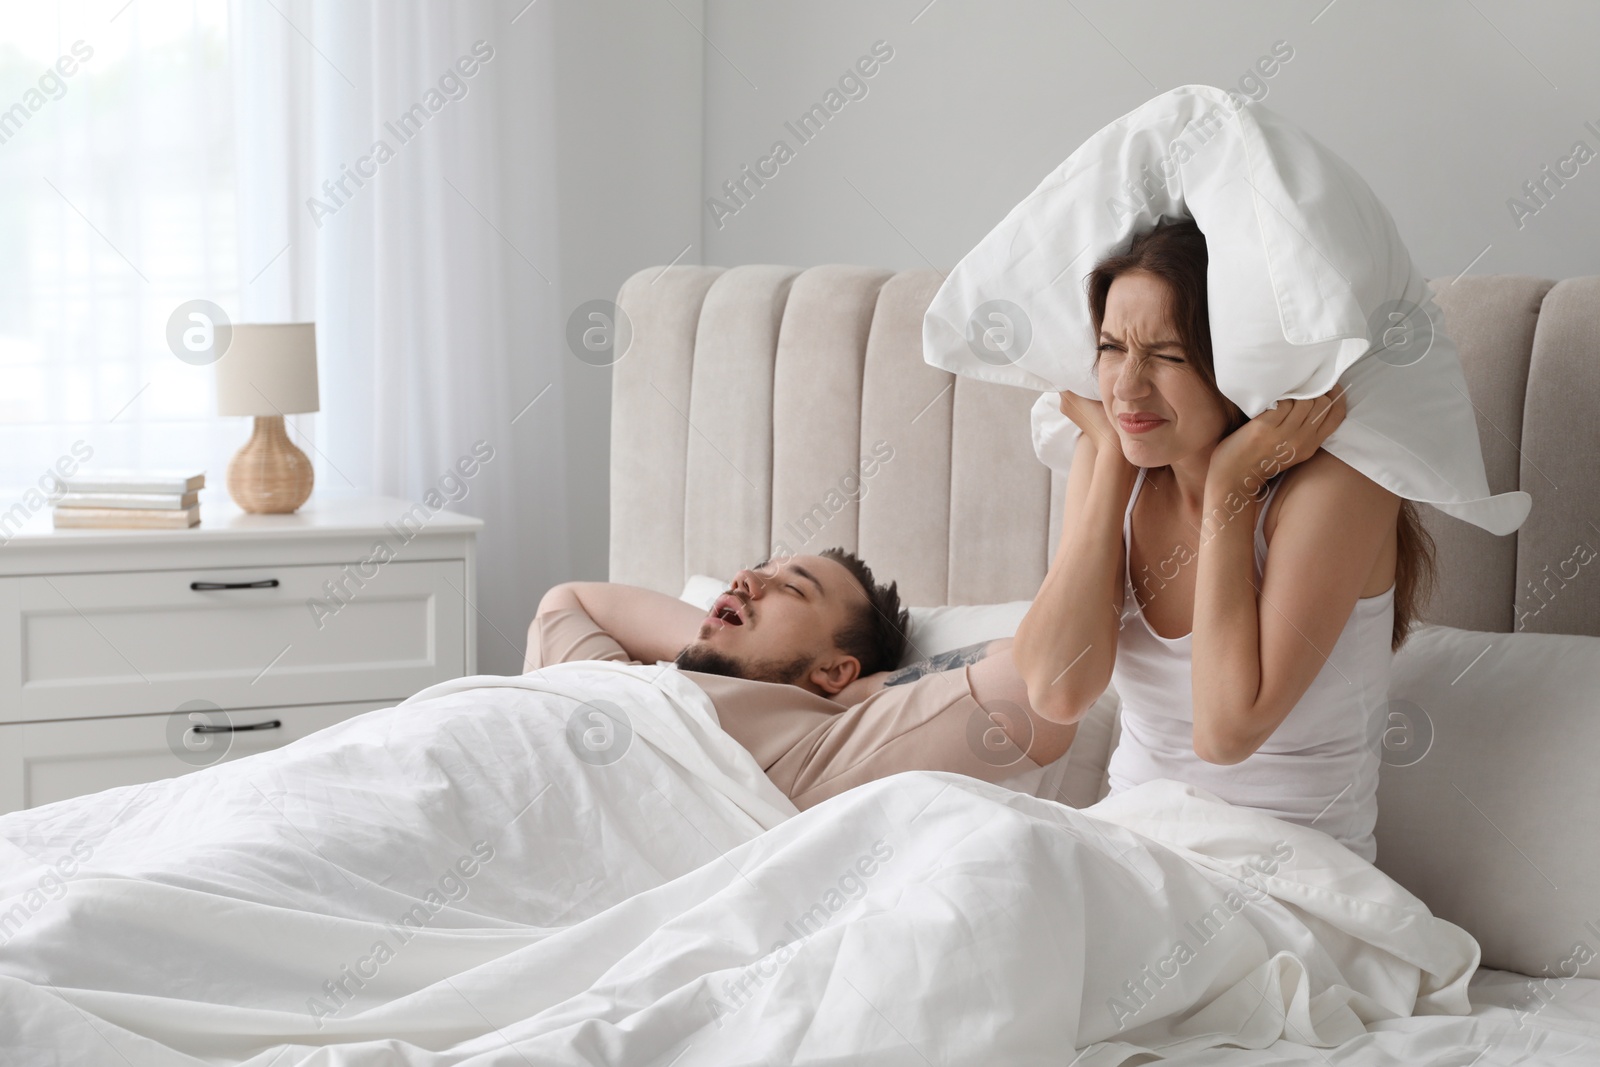 Photo of Bedtime. Irritated woman covering ears near her snoring husband in bed at home